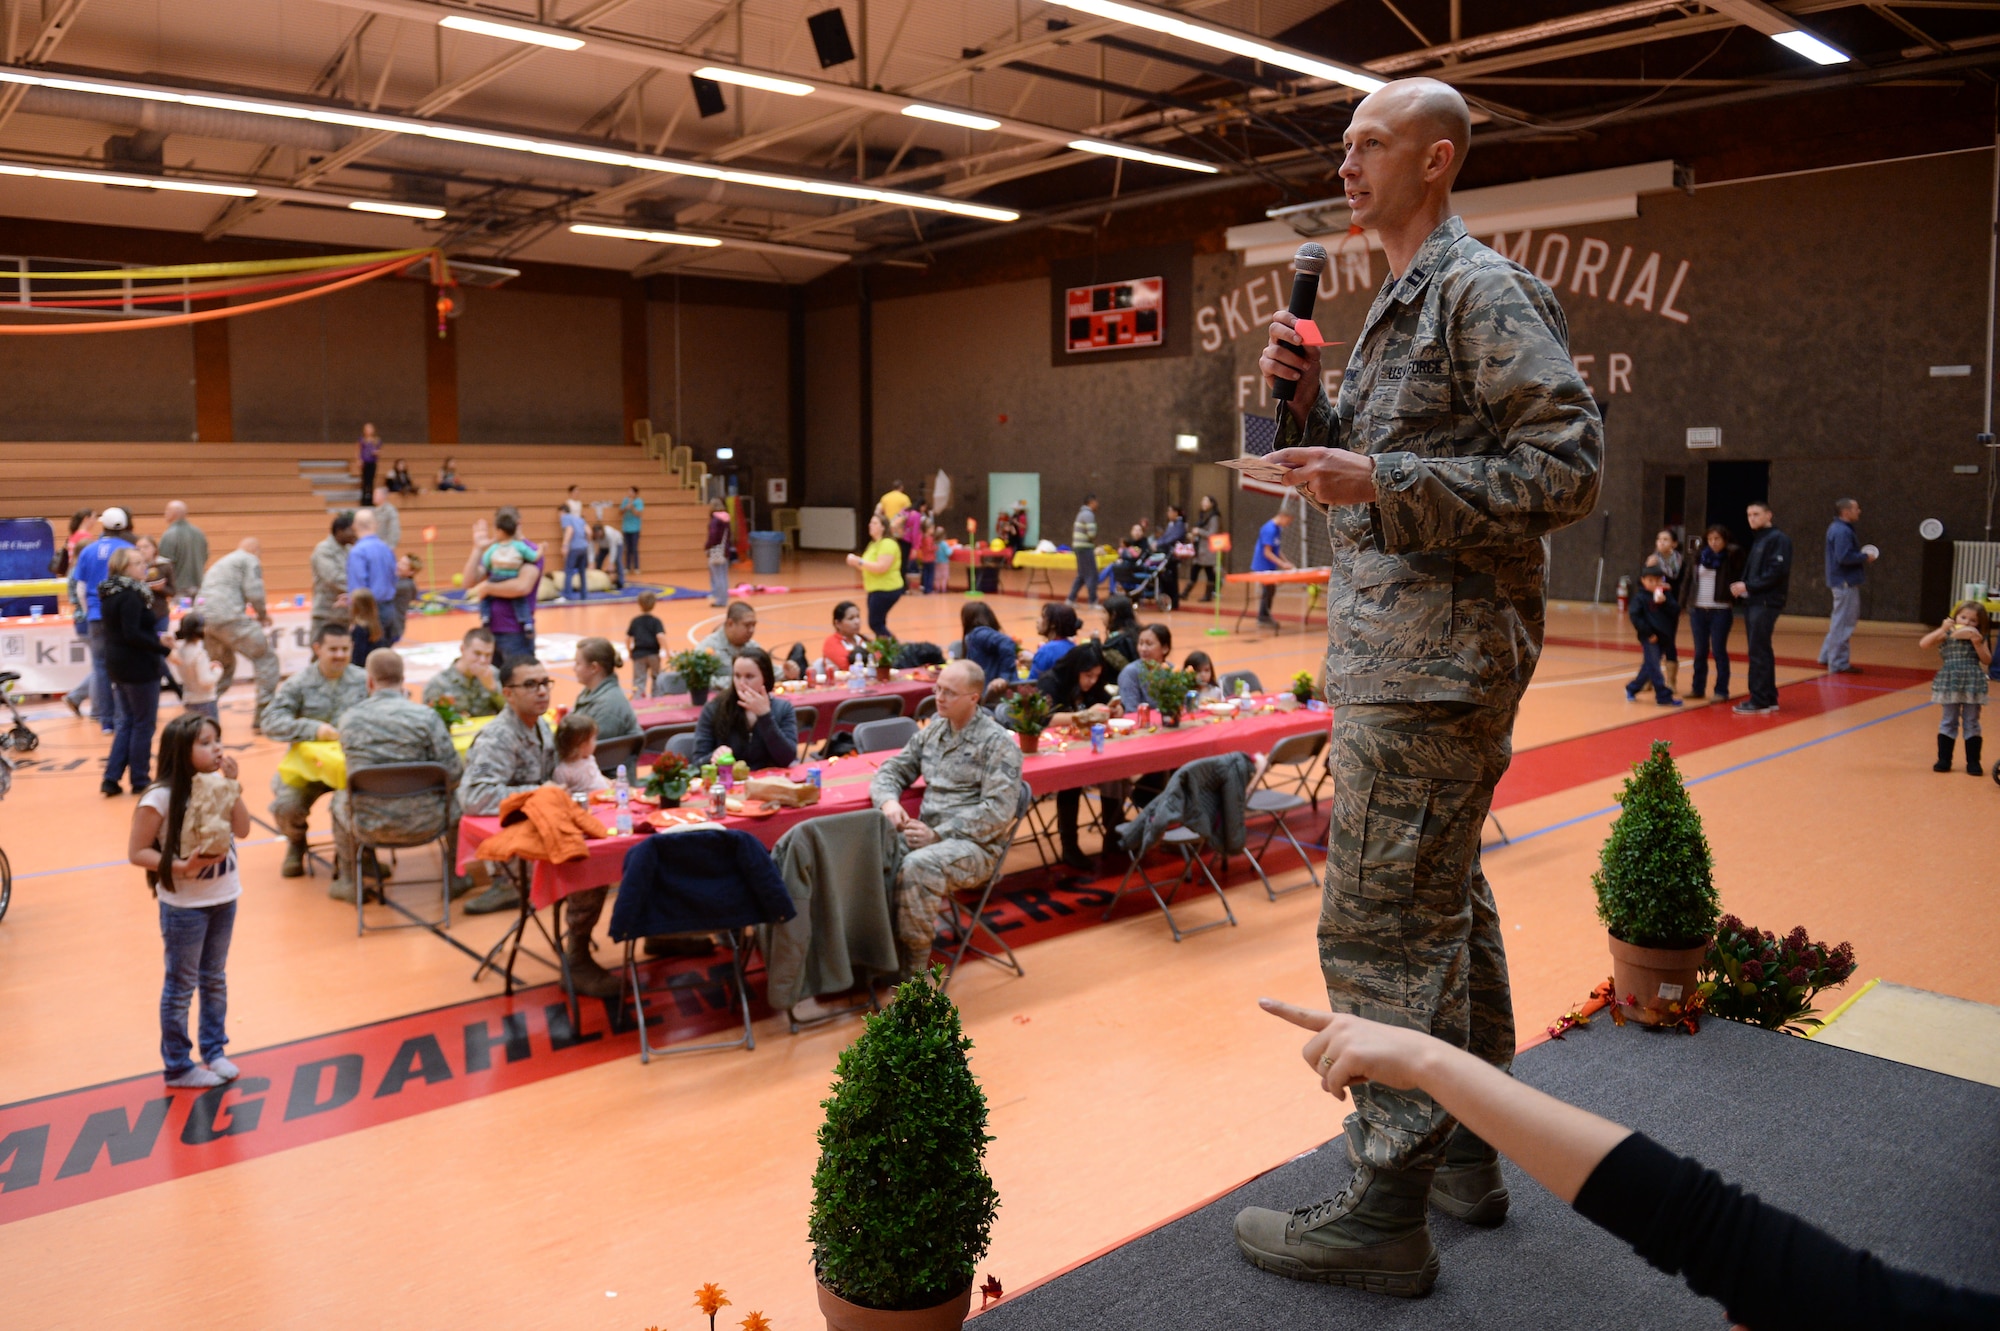 U.S. Air Force Chaplain (Capt.) Aaron Thorne, coordinator of Spantacular Family Fall Festival, selects a prize winner during the event Nov. 21, 2014, in the Skelton Memorial Fitness Center at Spangdahlem Air Base, Germany. Thorne drew names to randomly select participants to receive gifts. (U.S. Air Force photo by Staff Sgt. Daryl Knee/Released)

